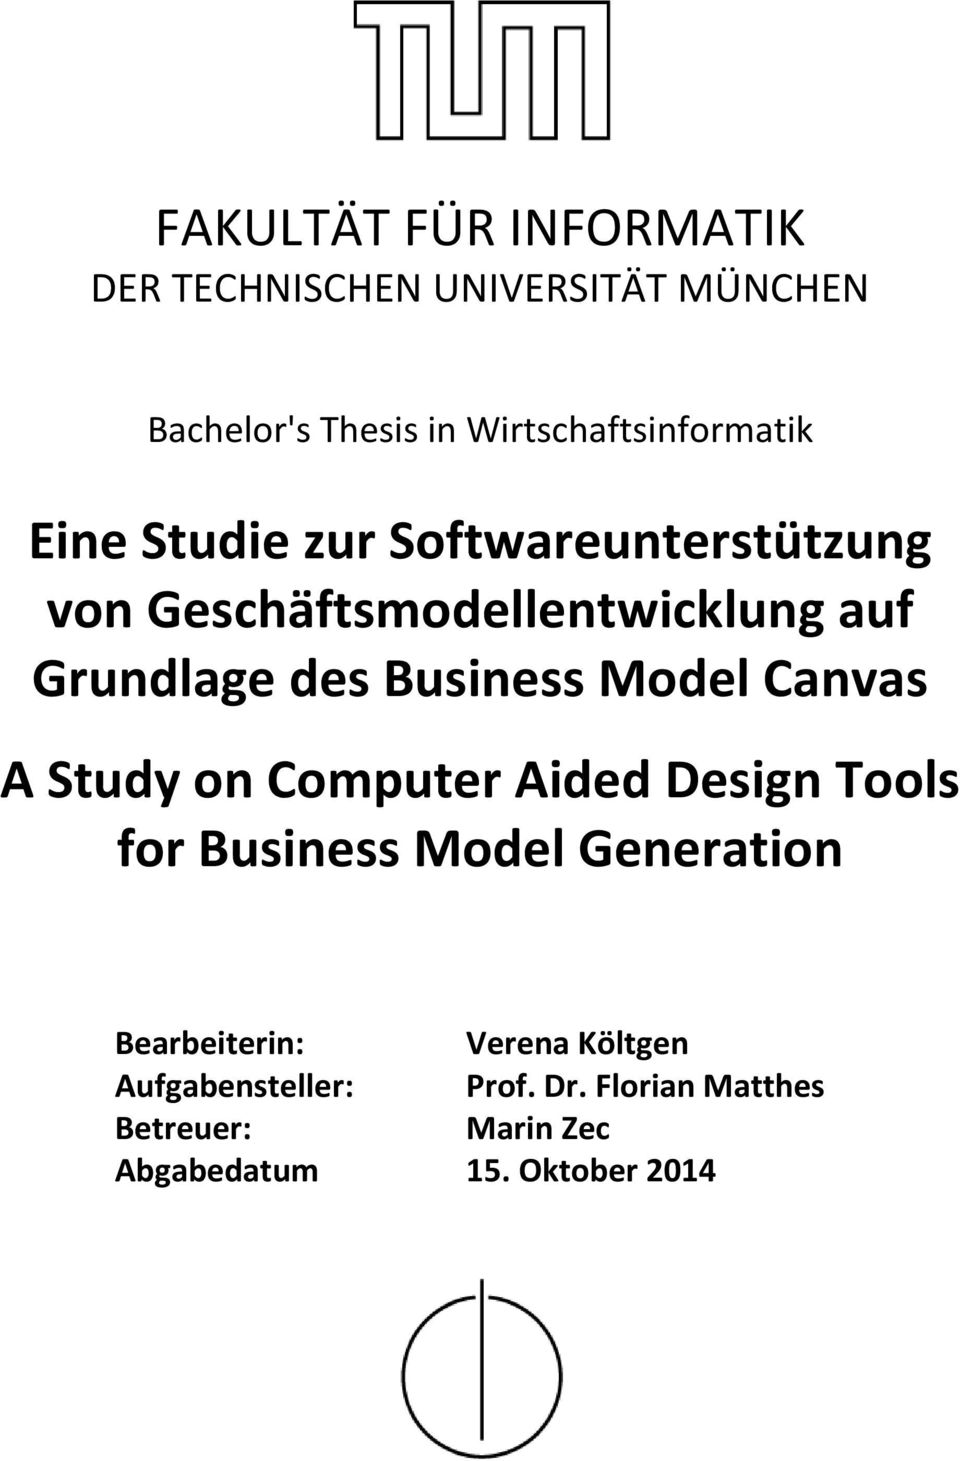 Grundlage des Business Model Canvas A Study on Computer Aided Design Tools for Business Model